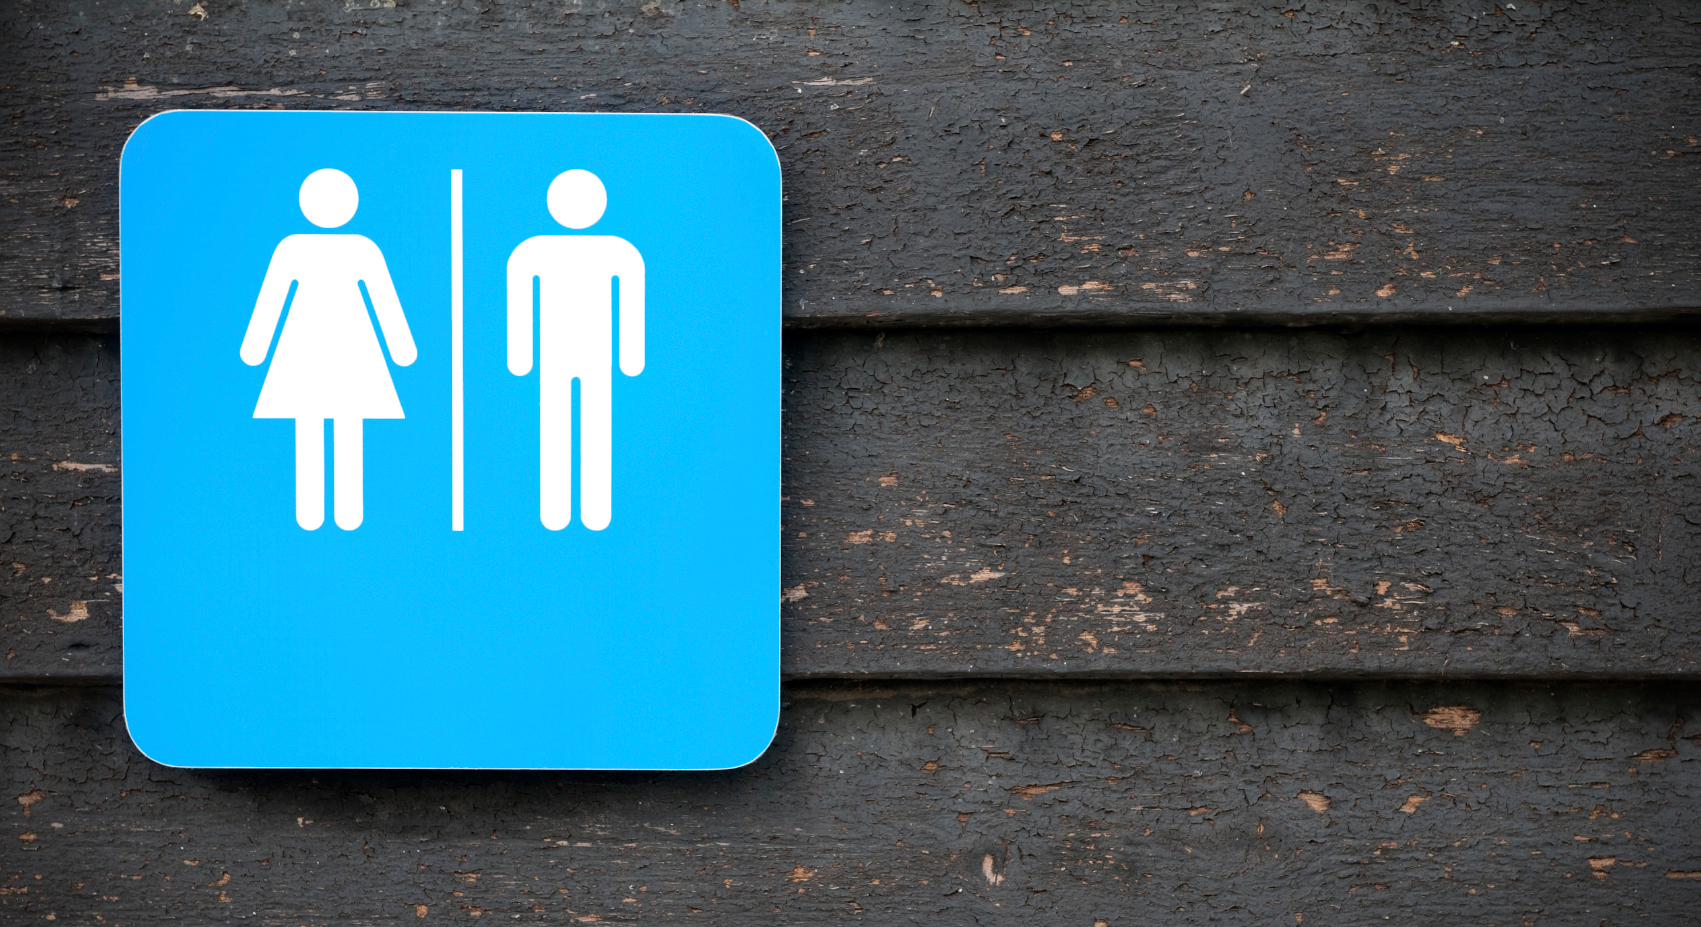 If I laugh too hard, I’ll pee my pants! Social isolation and urinary incontinence: there are many effective treatments.